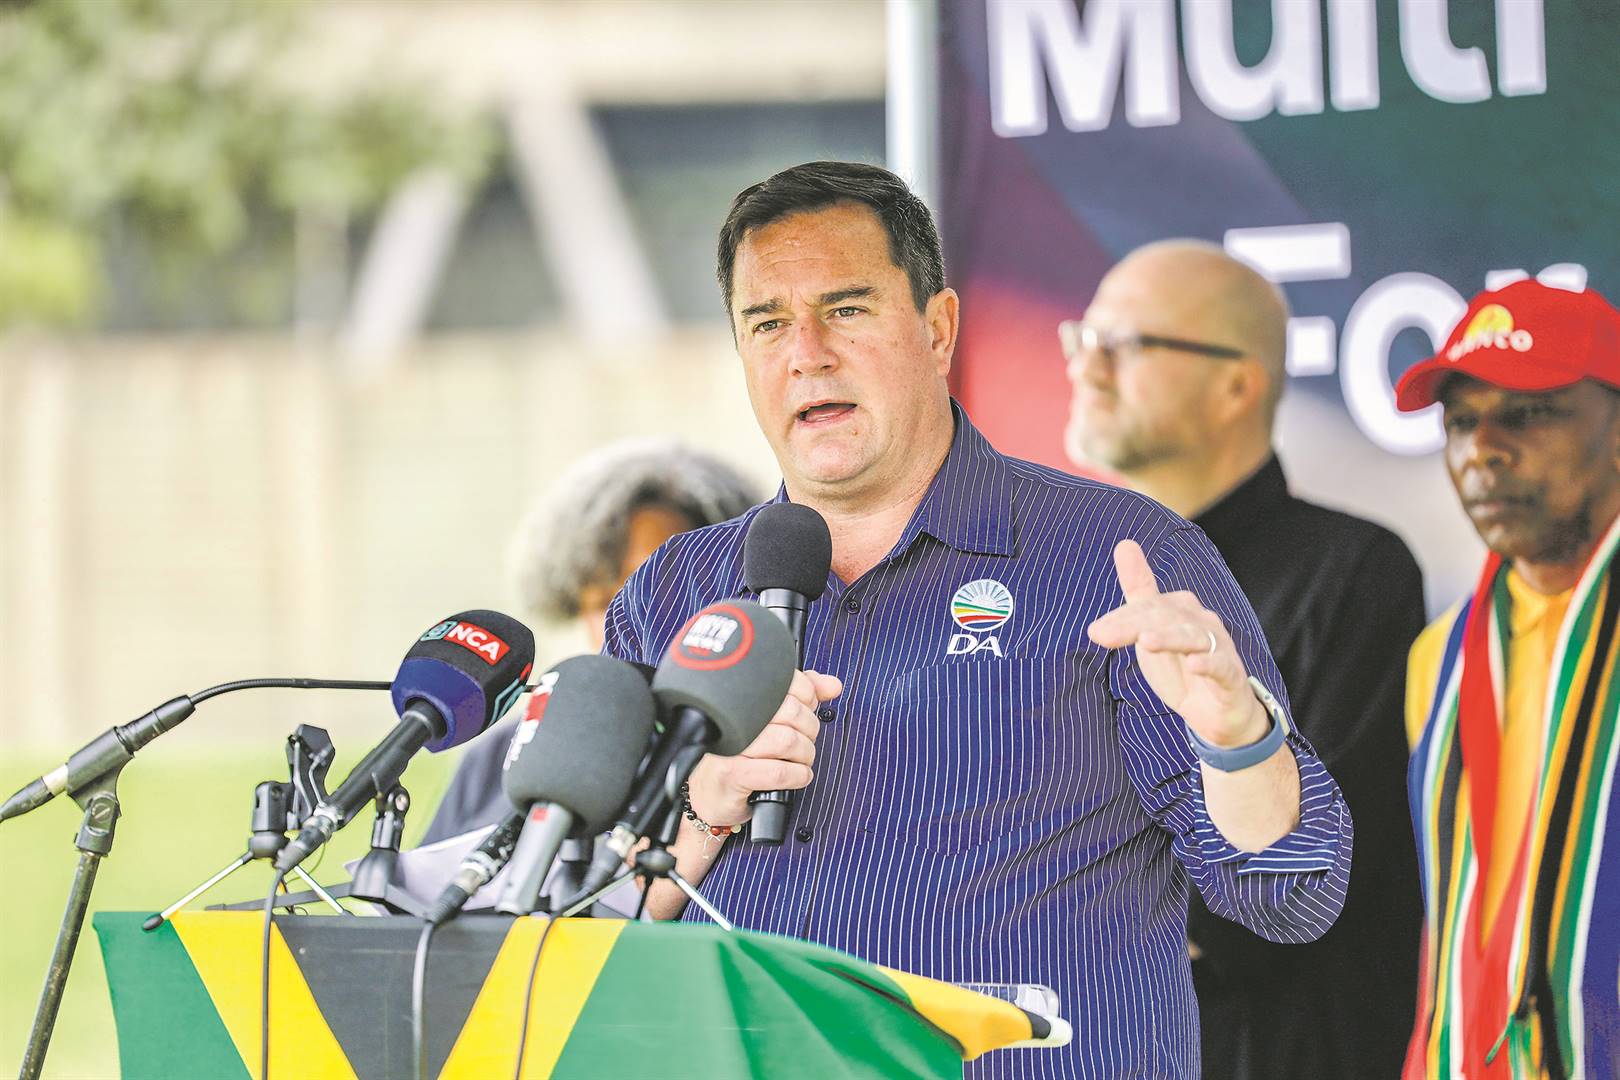 DA leader John Steenhuisen at the Multi-Party Charter press conference.